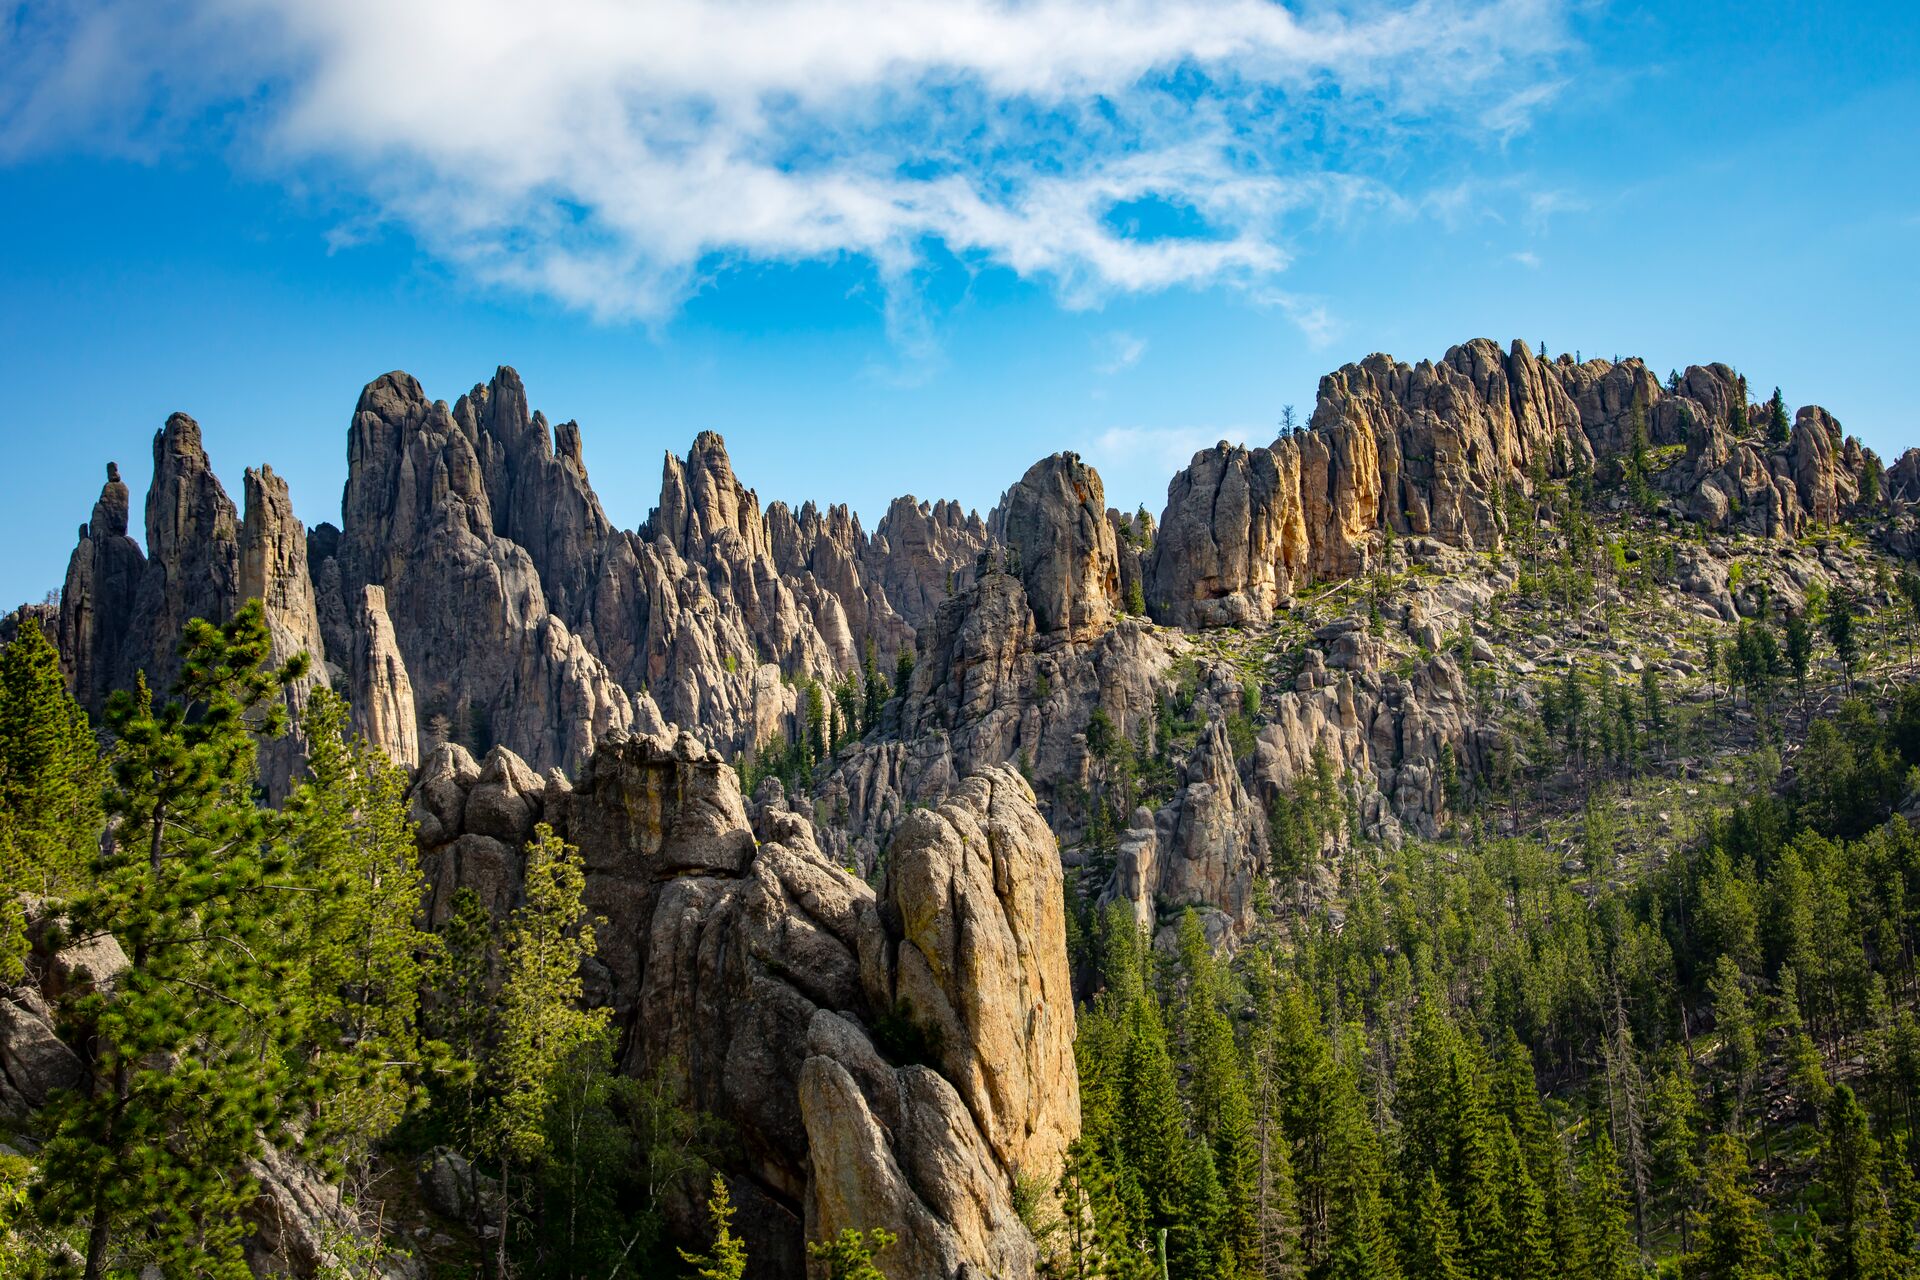 Image of ‘needles’ rocks in Black Hills of South Dakota, set amongst green forrest and a bright blue sky.